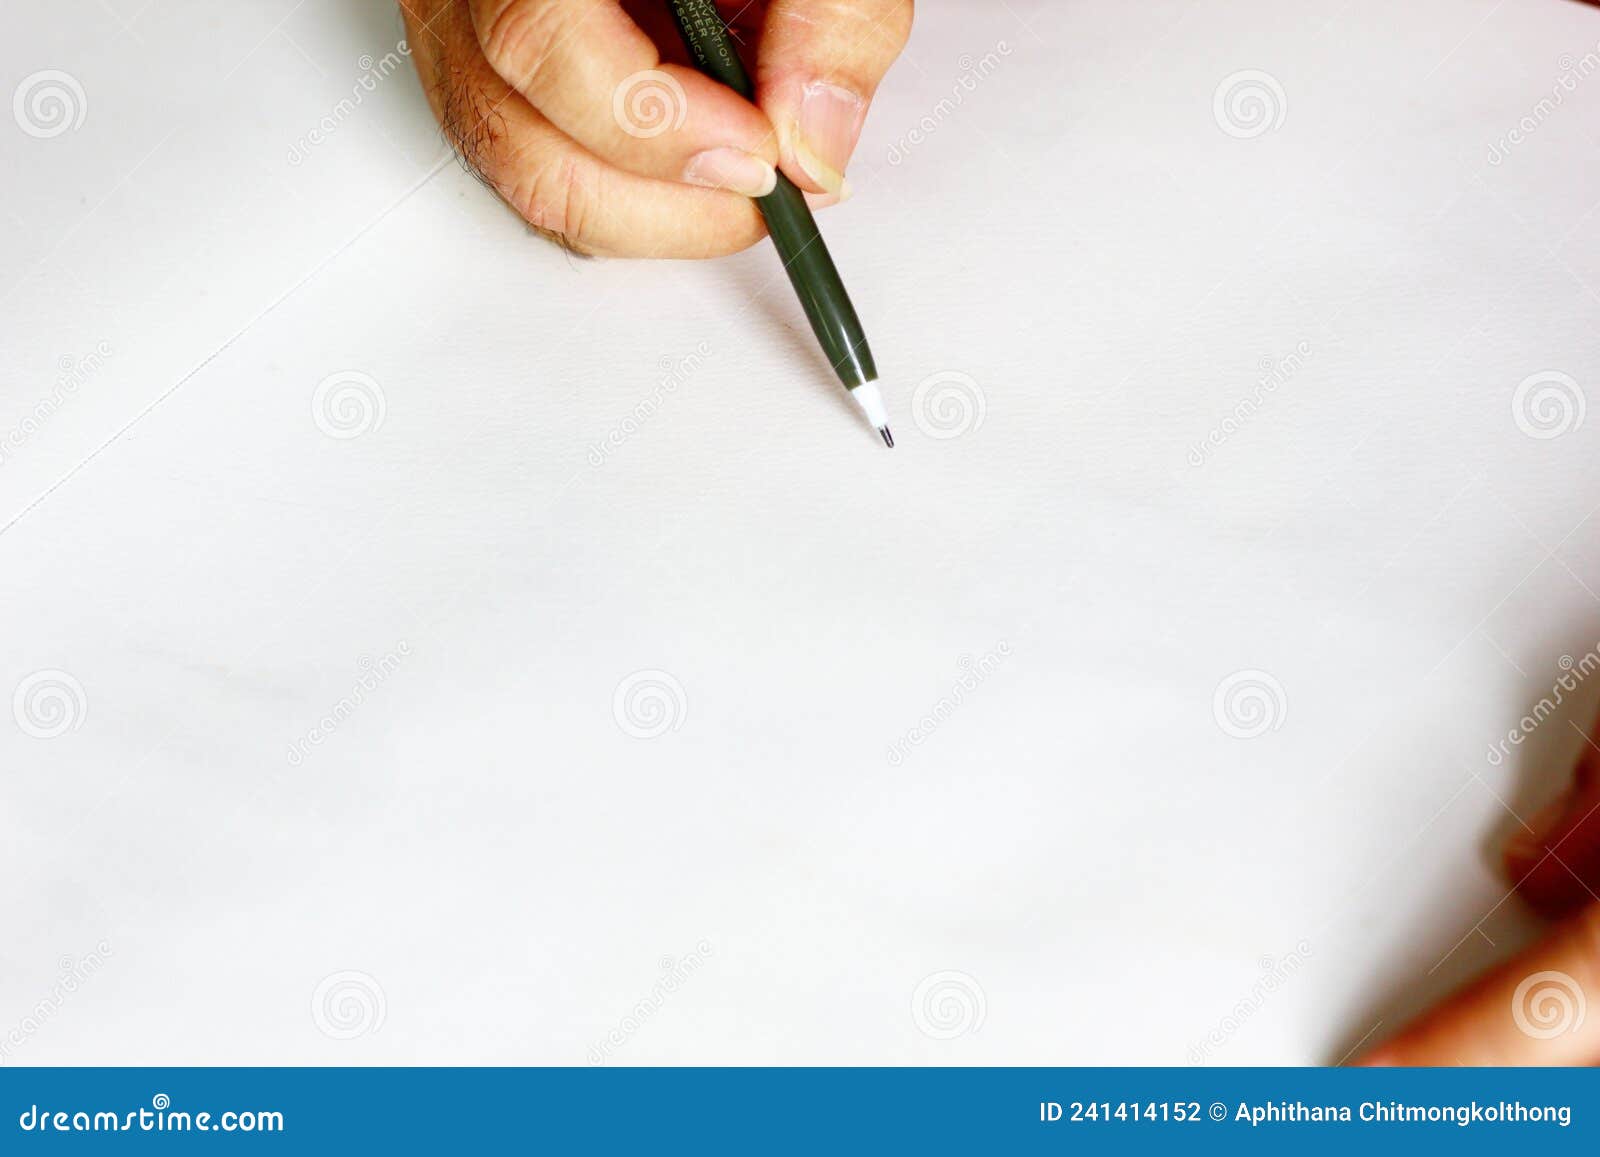 The Painter Drawing on White Paper Stock Photo - Image of artist ...